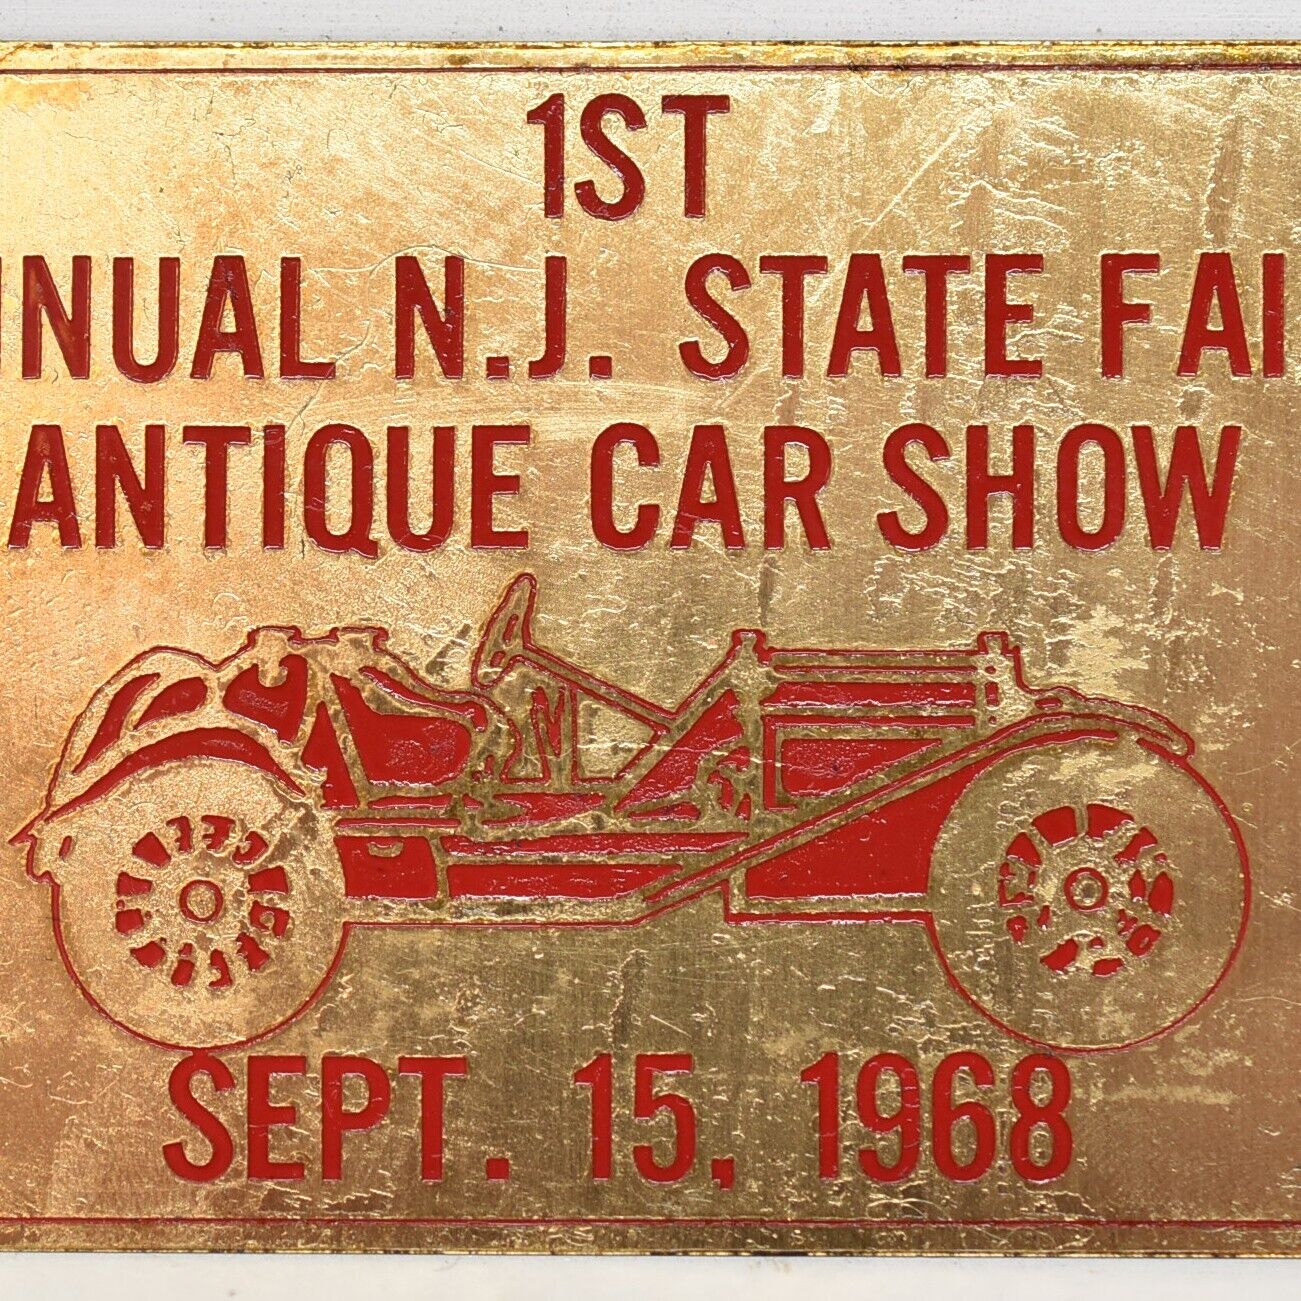 1968 New Jersey State Fair Antique Car Show Trenton Mercer County New Jersey